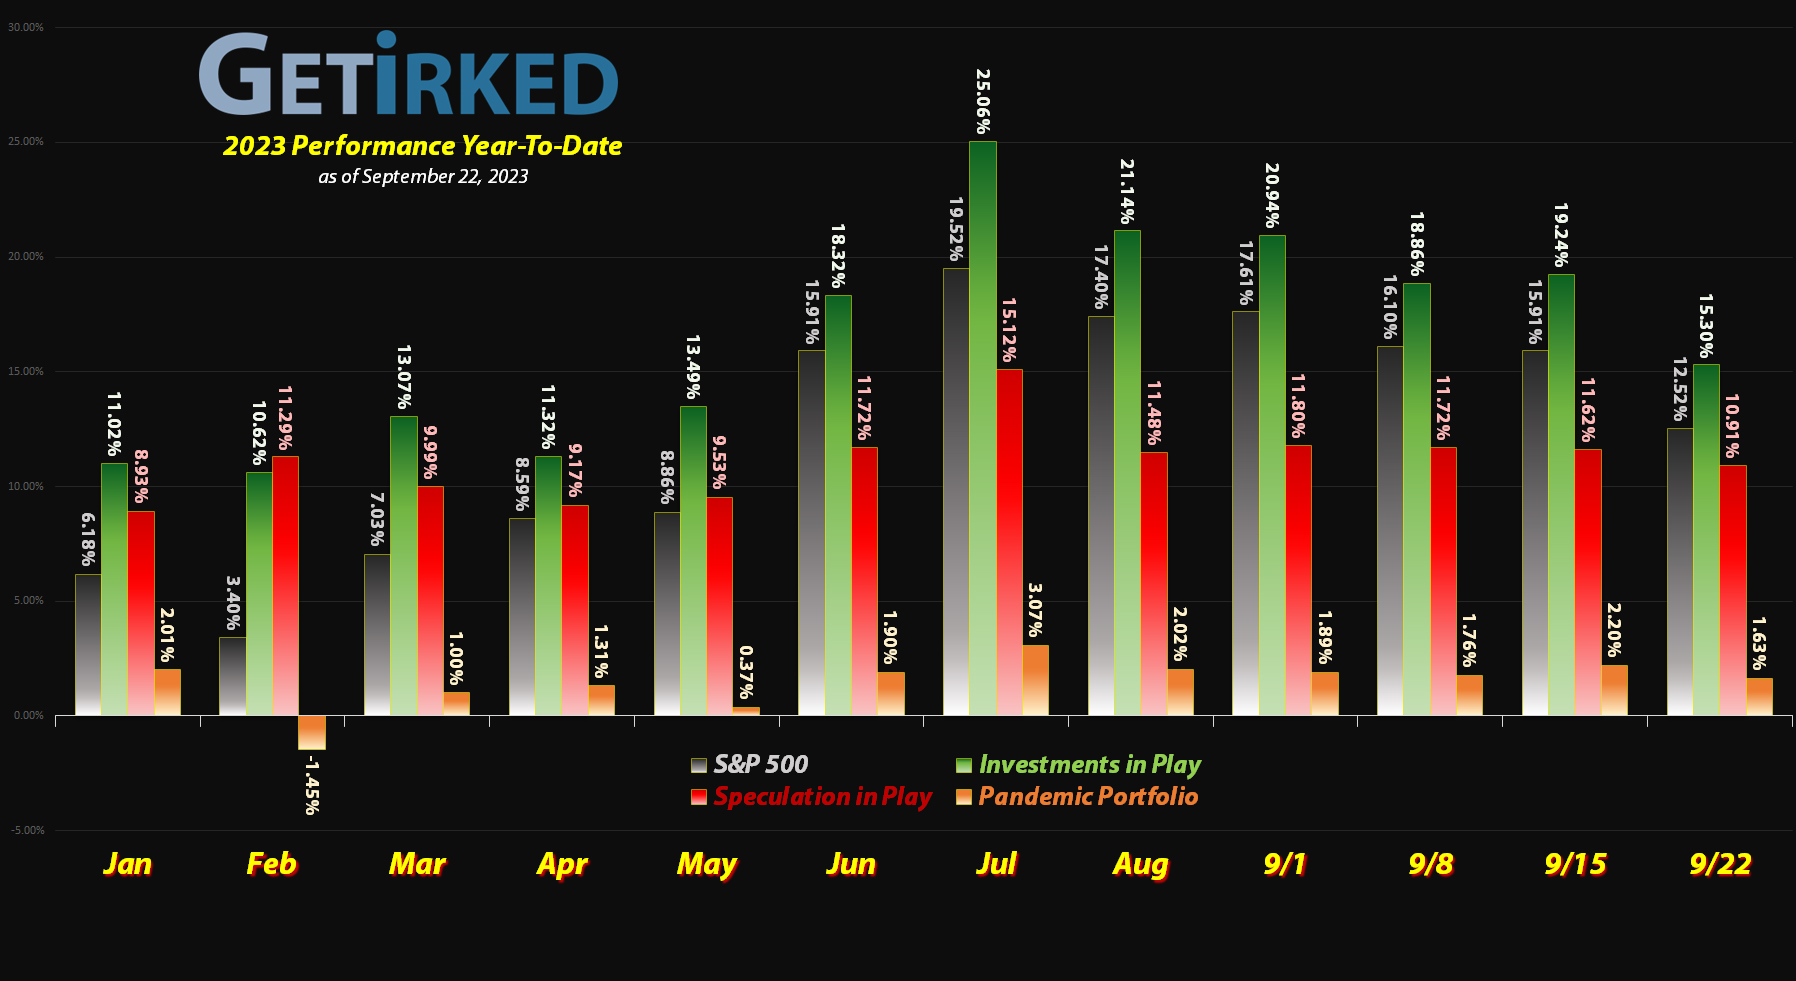 Get Irked - Year-to-Date Performance - Investments in Play vs. Speculation in Play - 2023 Year-to-Date Performance